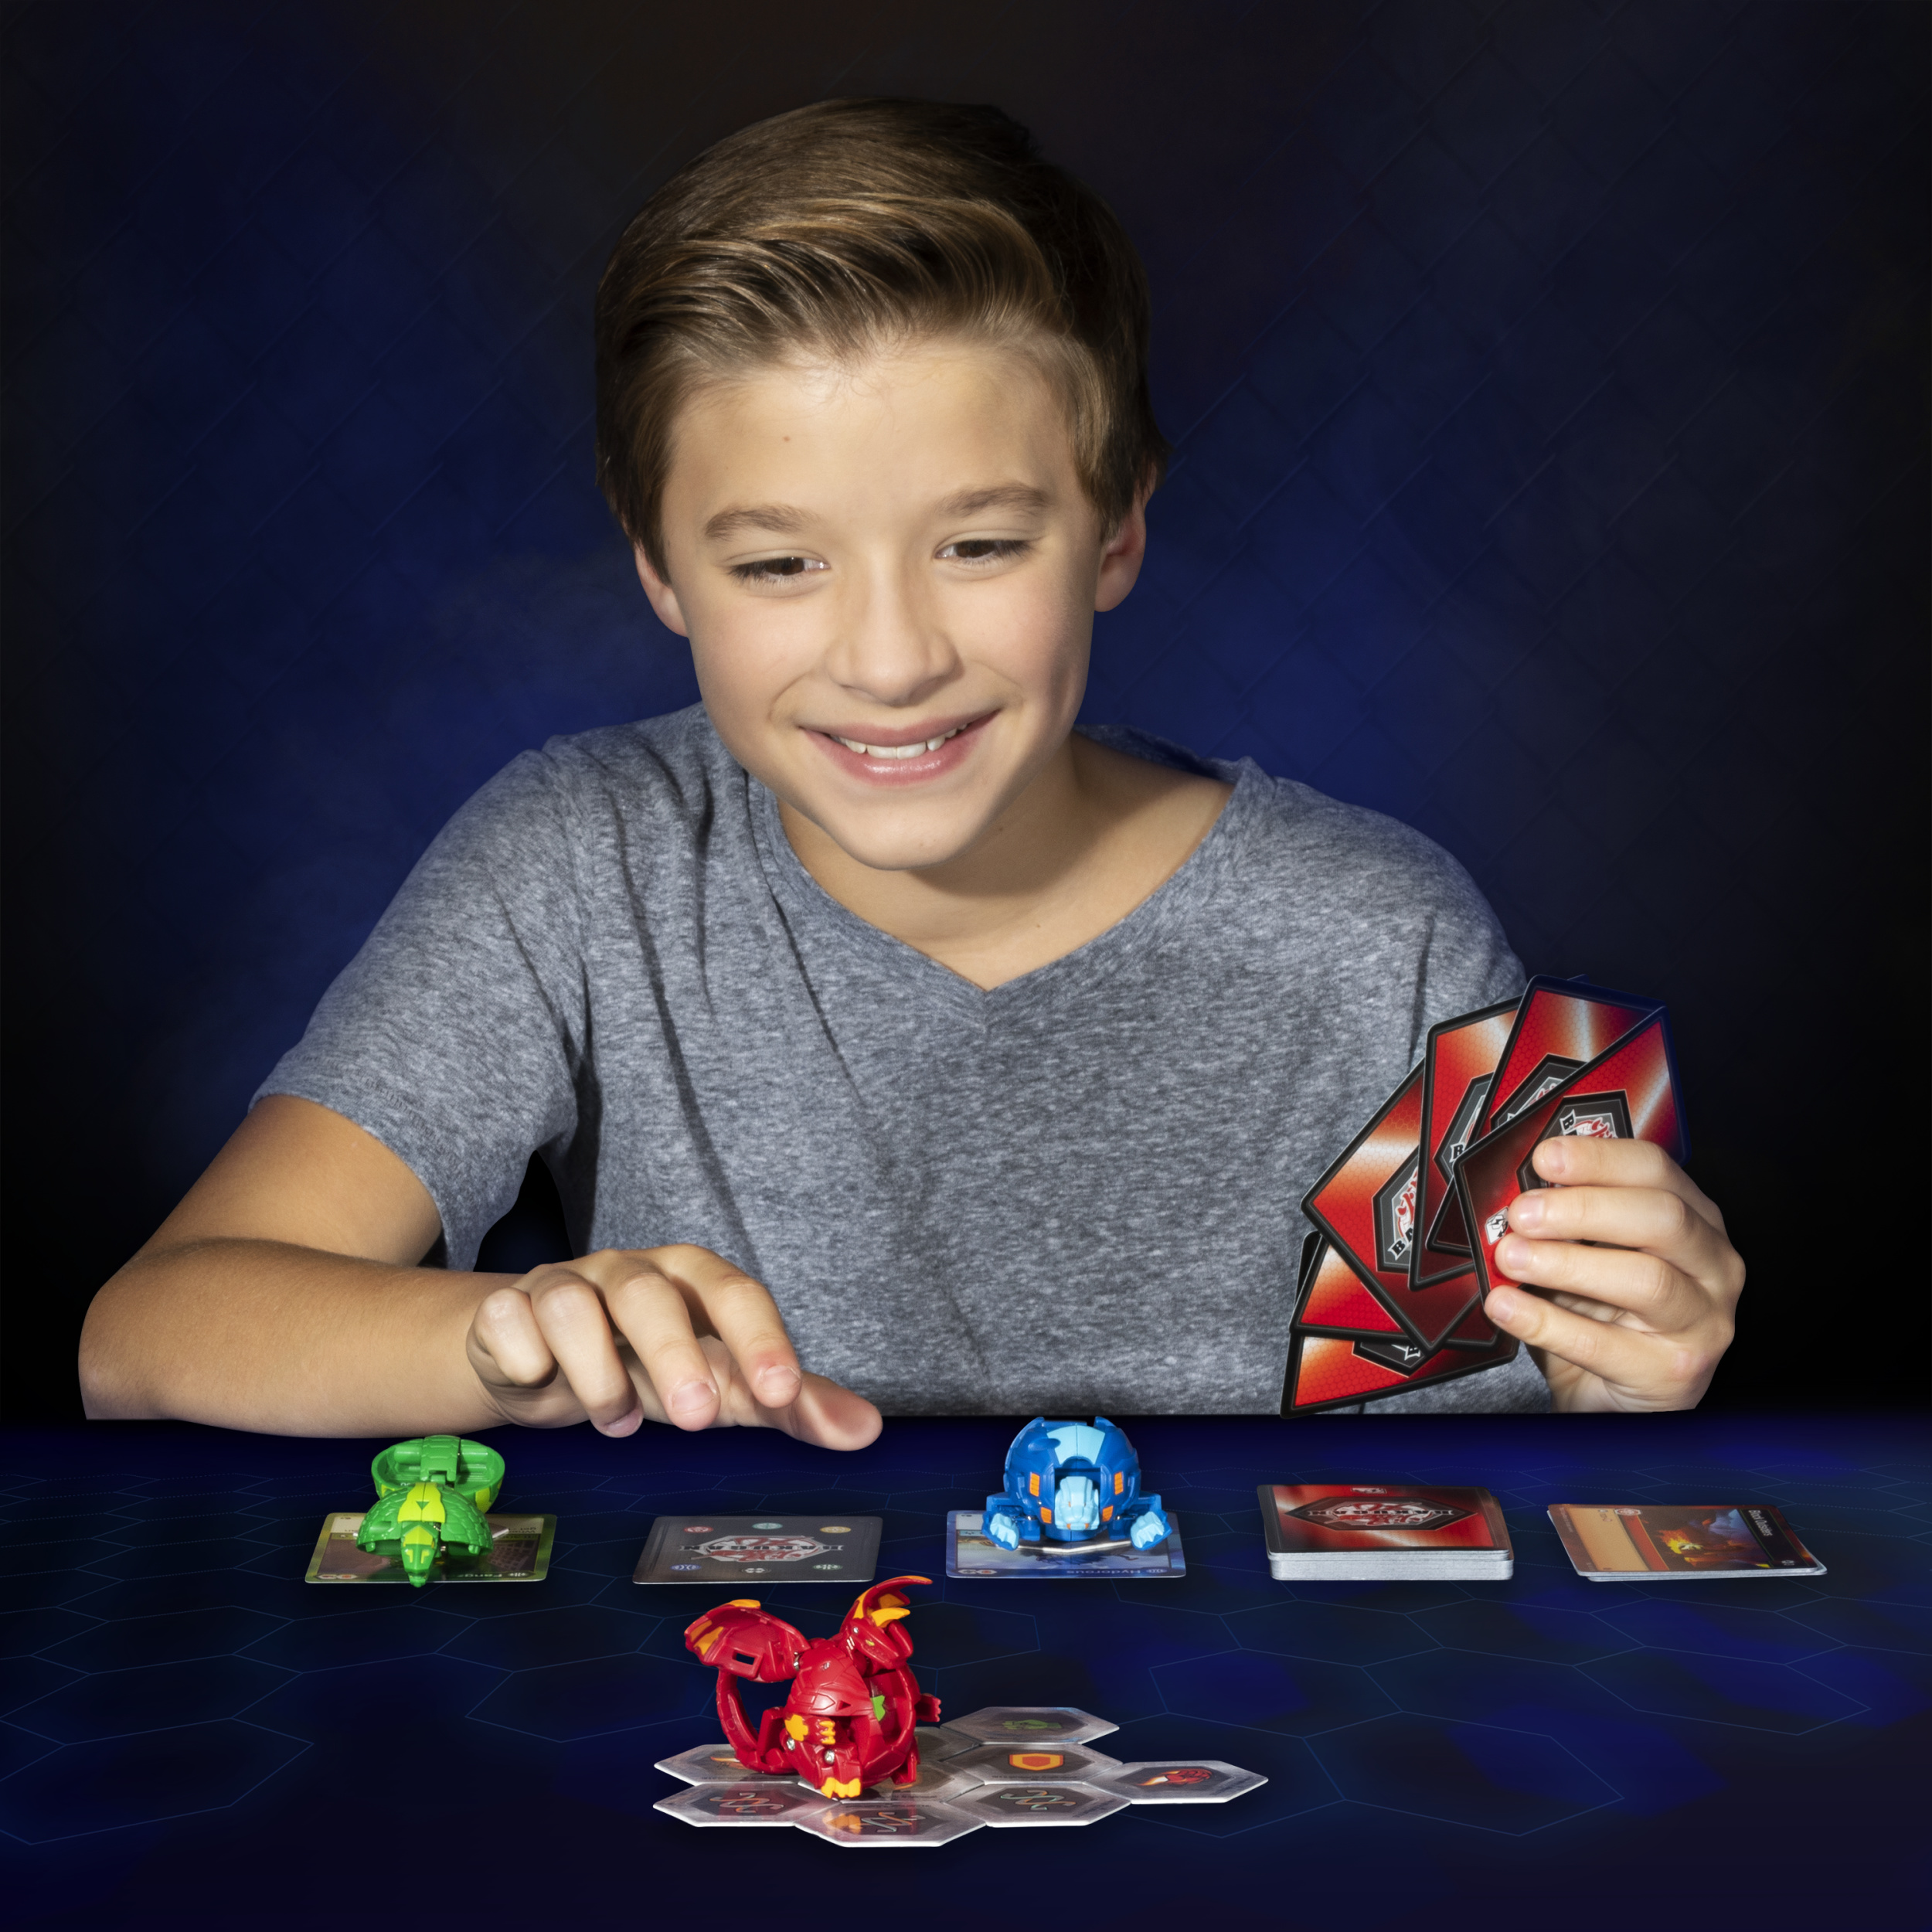 Bakugan, Dragonoid, 2-inch Tall Collectible Action Figure and Trading Card, for Ages 6 and Up - image 5 of 5